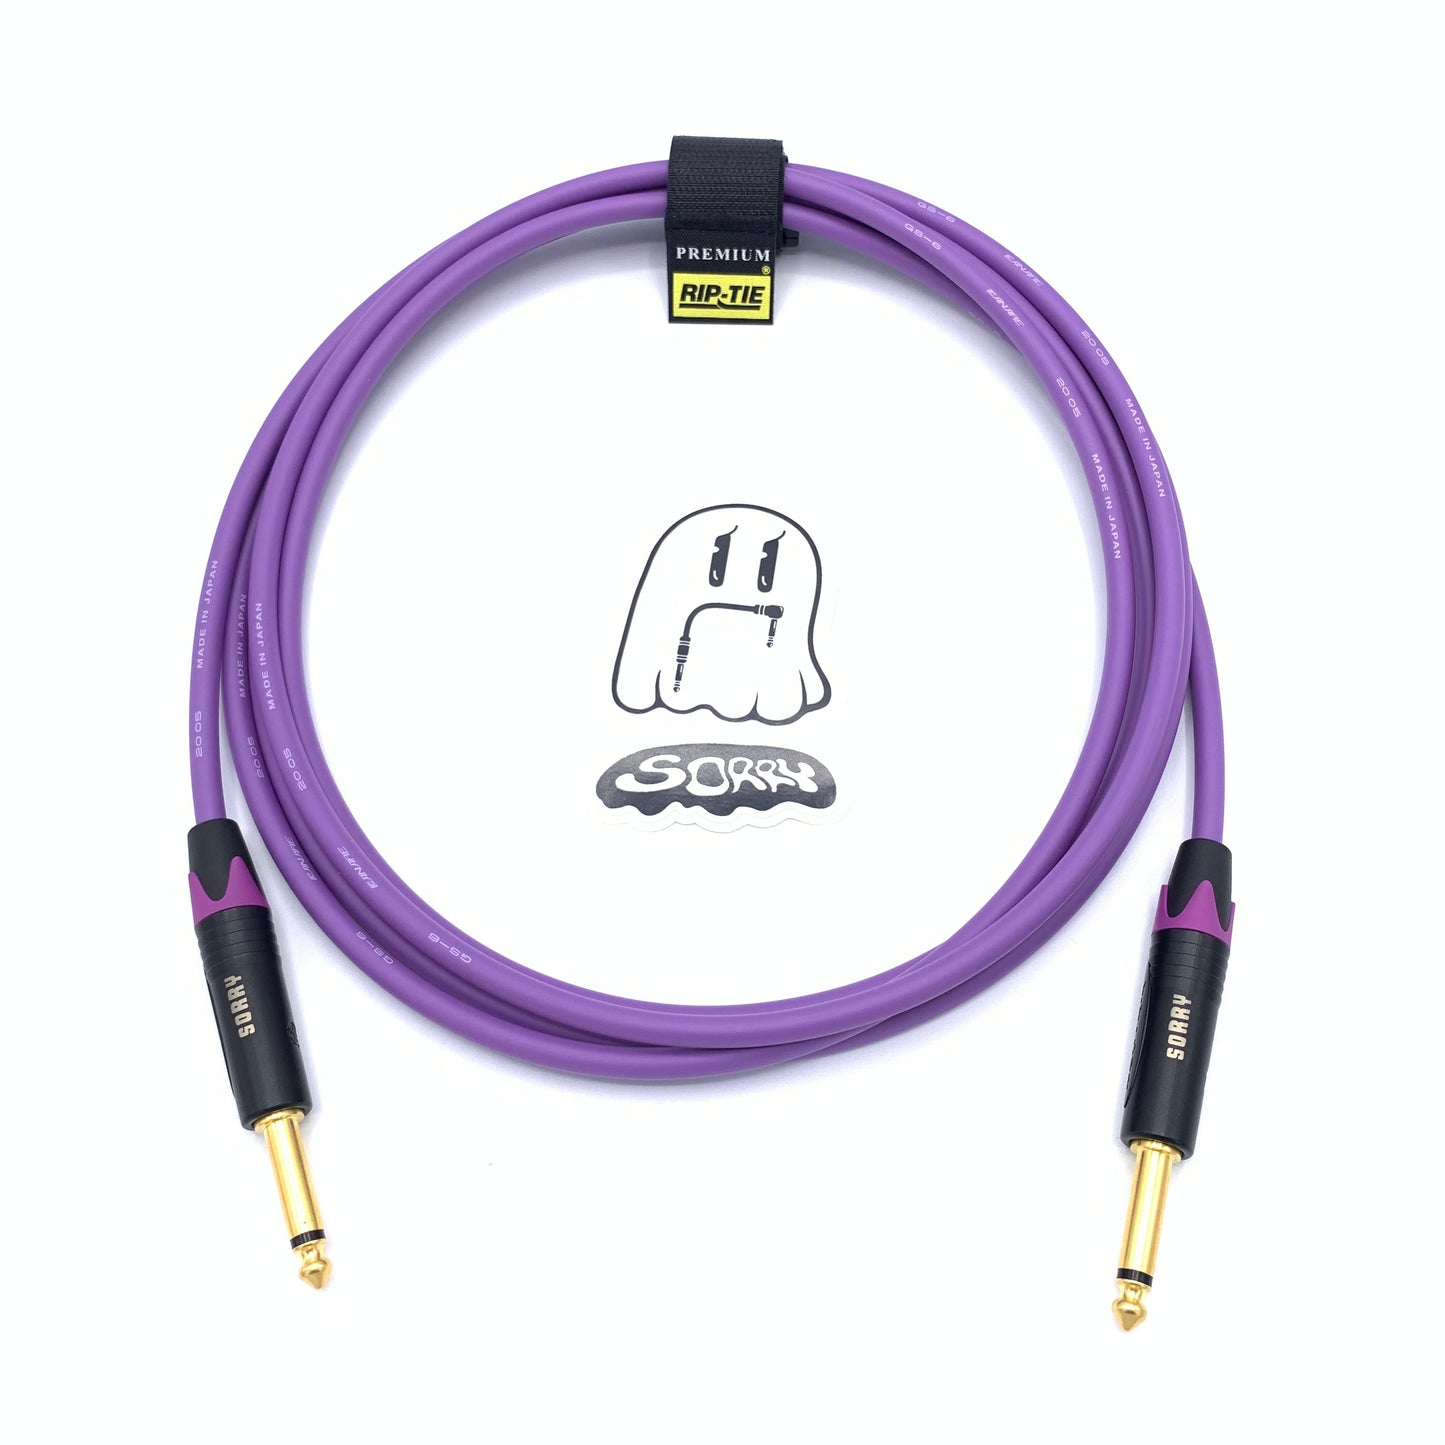 SORRY Straight to Straight Guitar / Instrument Cable - Standard Purple